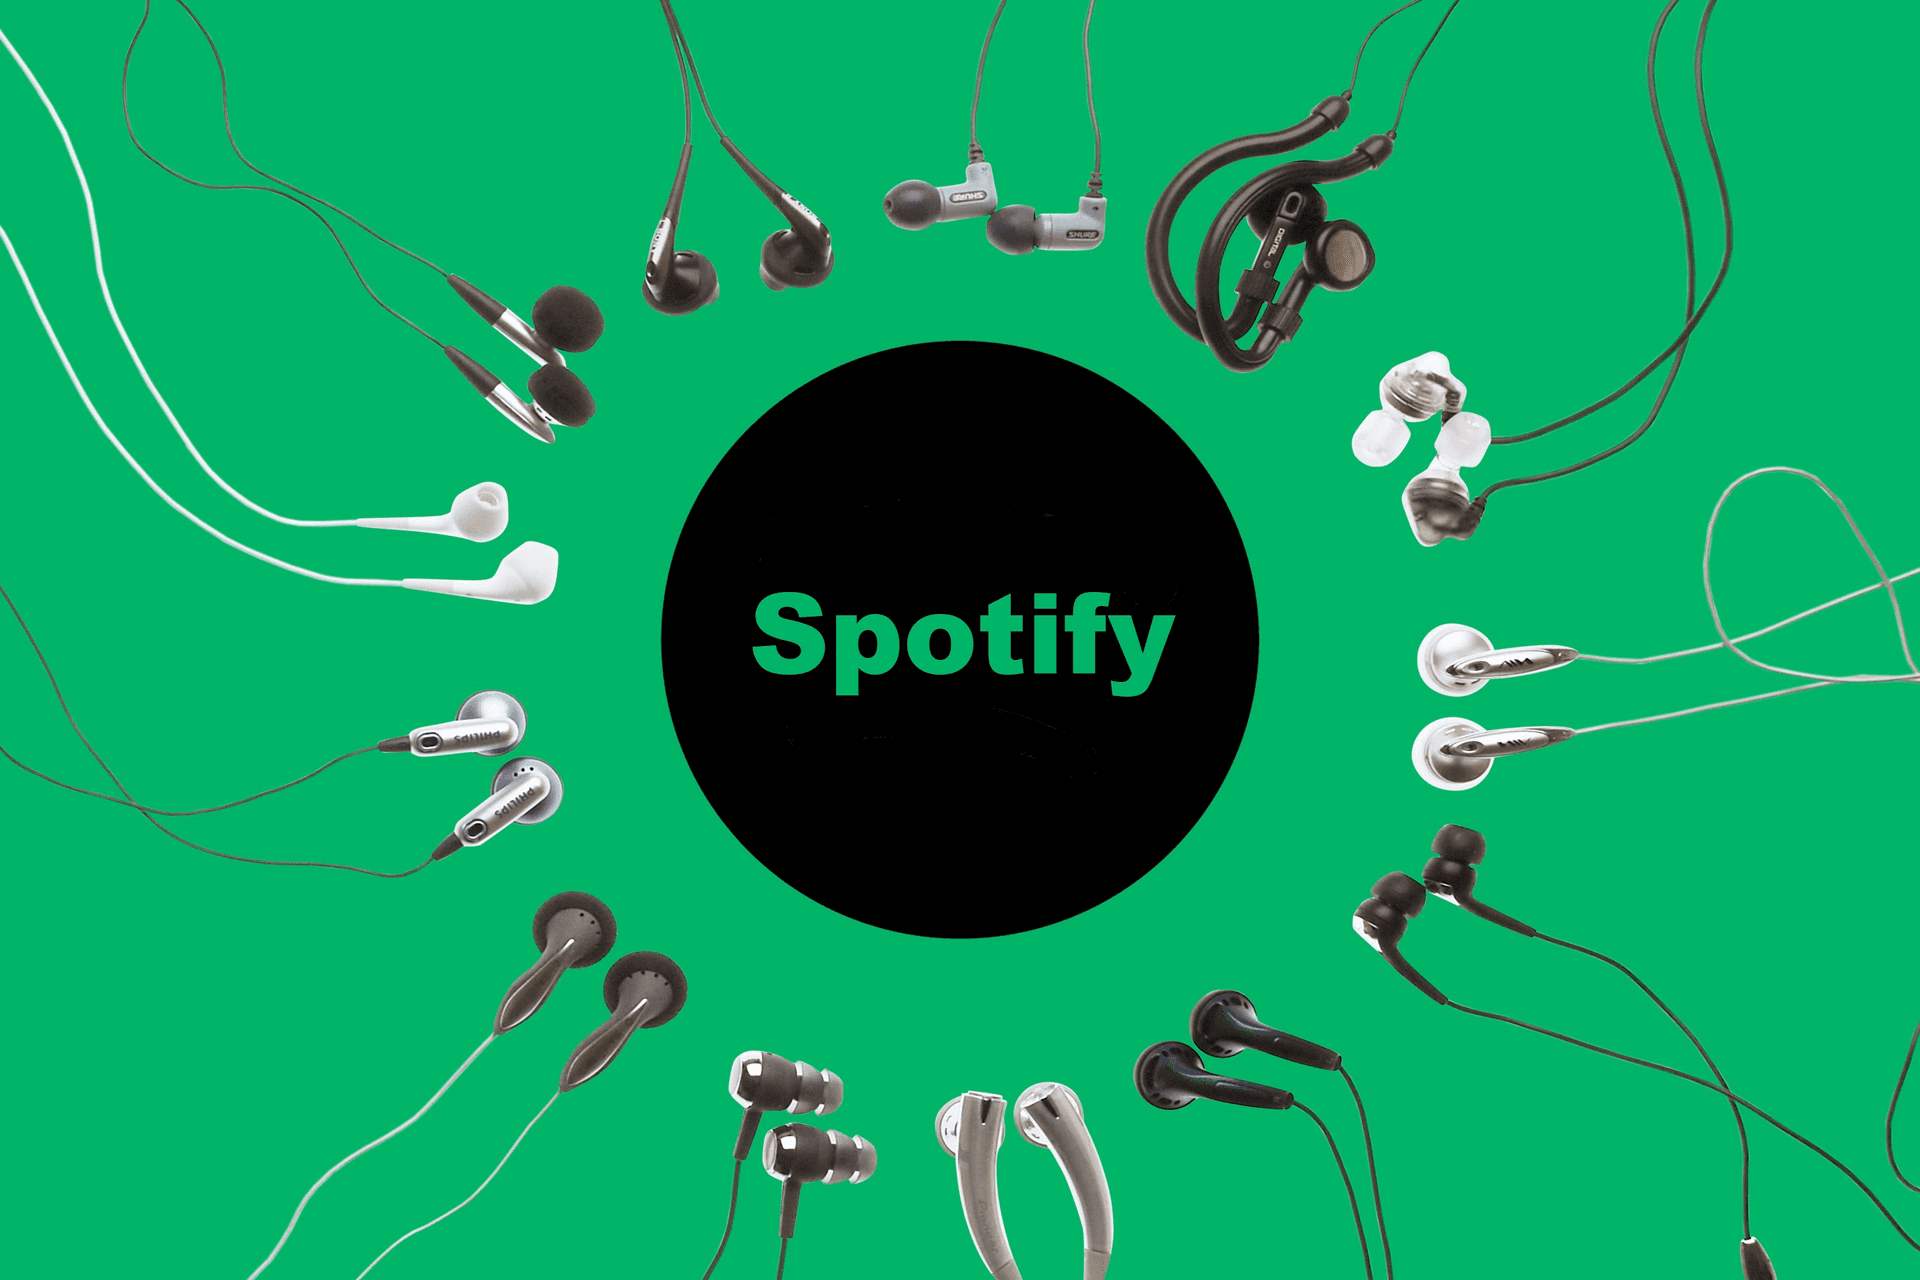 Spotify for artists: create your artist name and put it out on your Spotify profile.